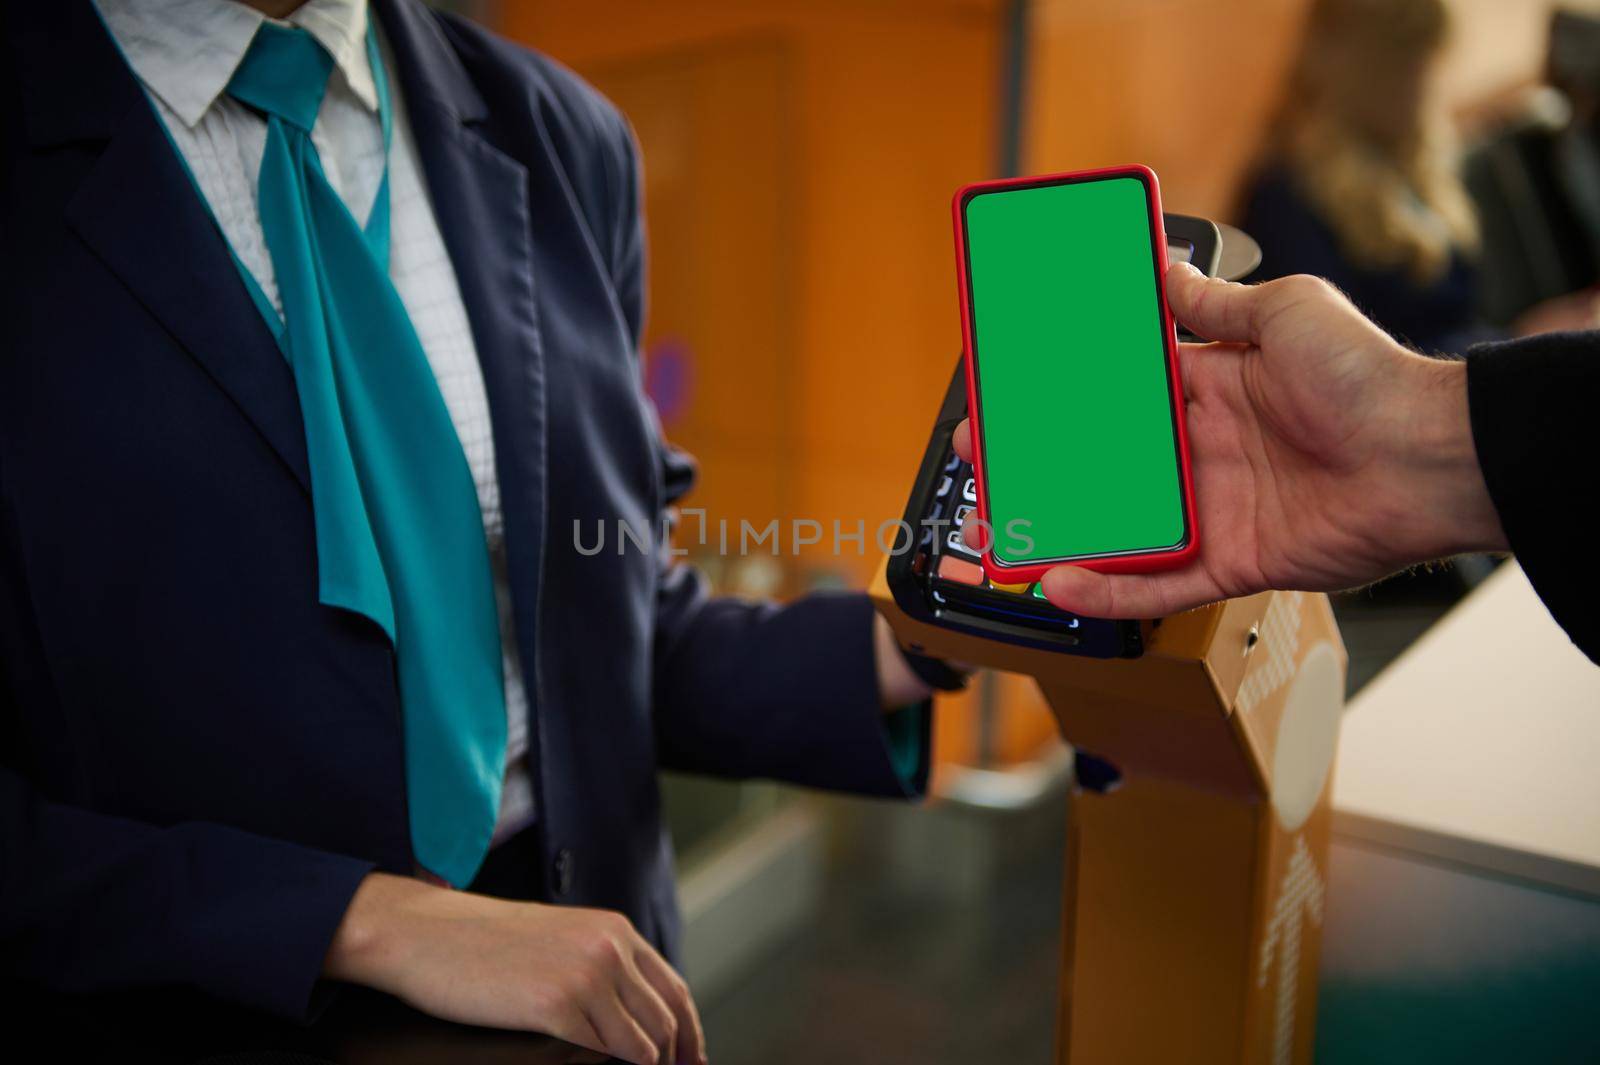 Close-up of man's hand holding mobile phone with green chroma key blank screen with copy space for mobile apps and advertising, near bank terminal while going through flight check-in board at airport